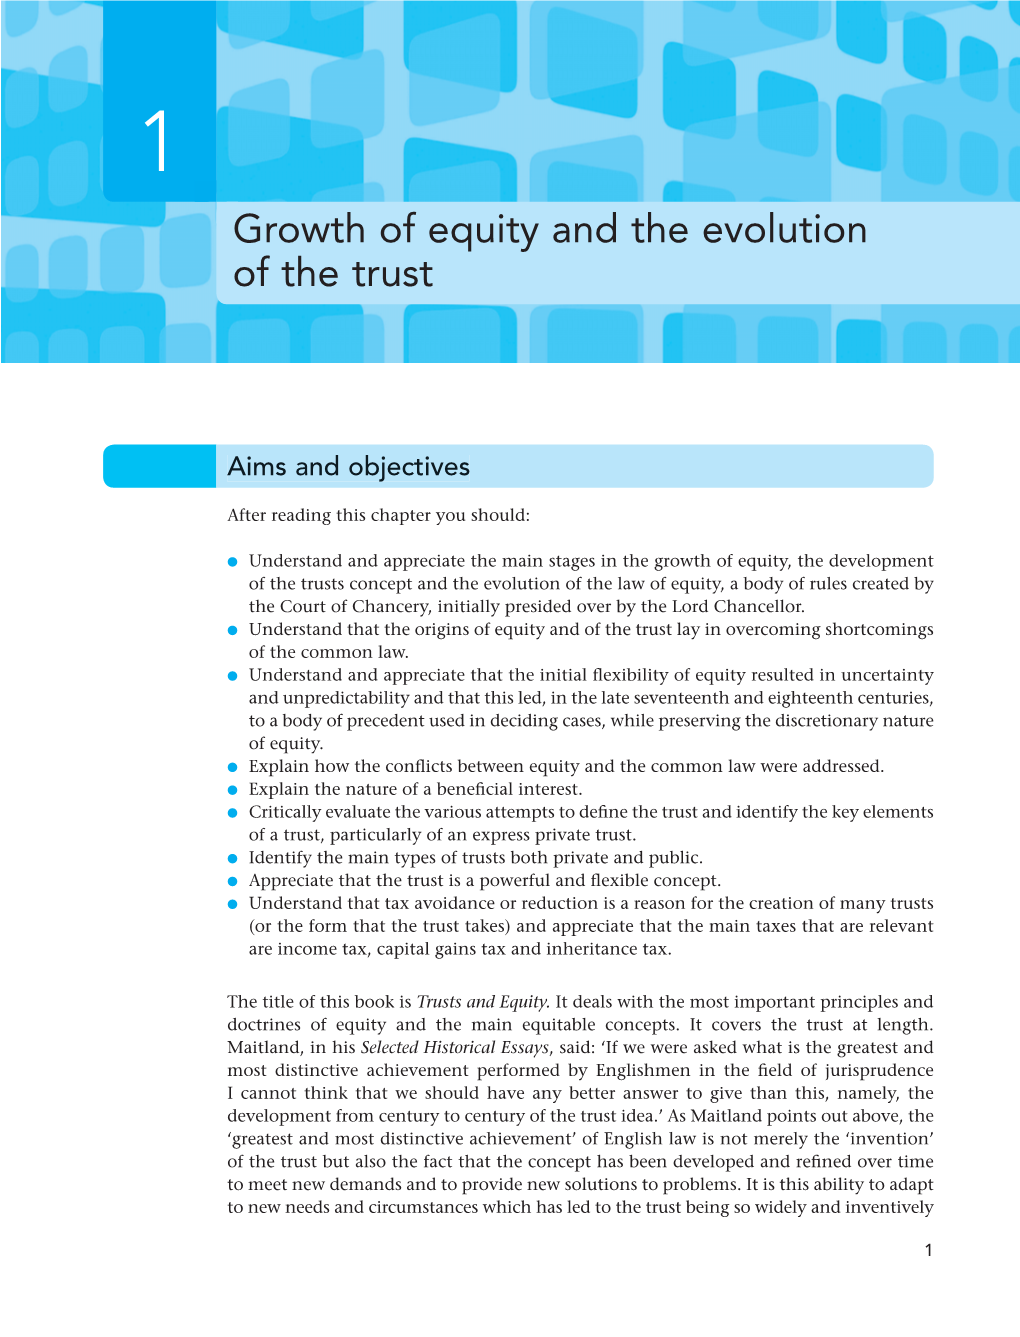 Growth of Equity and the Evolution of the Trust